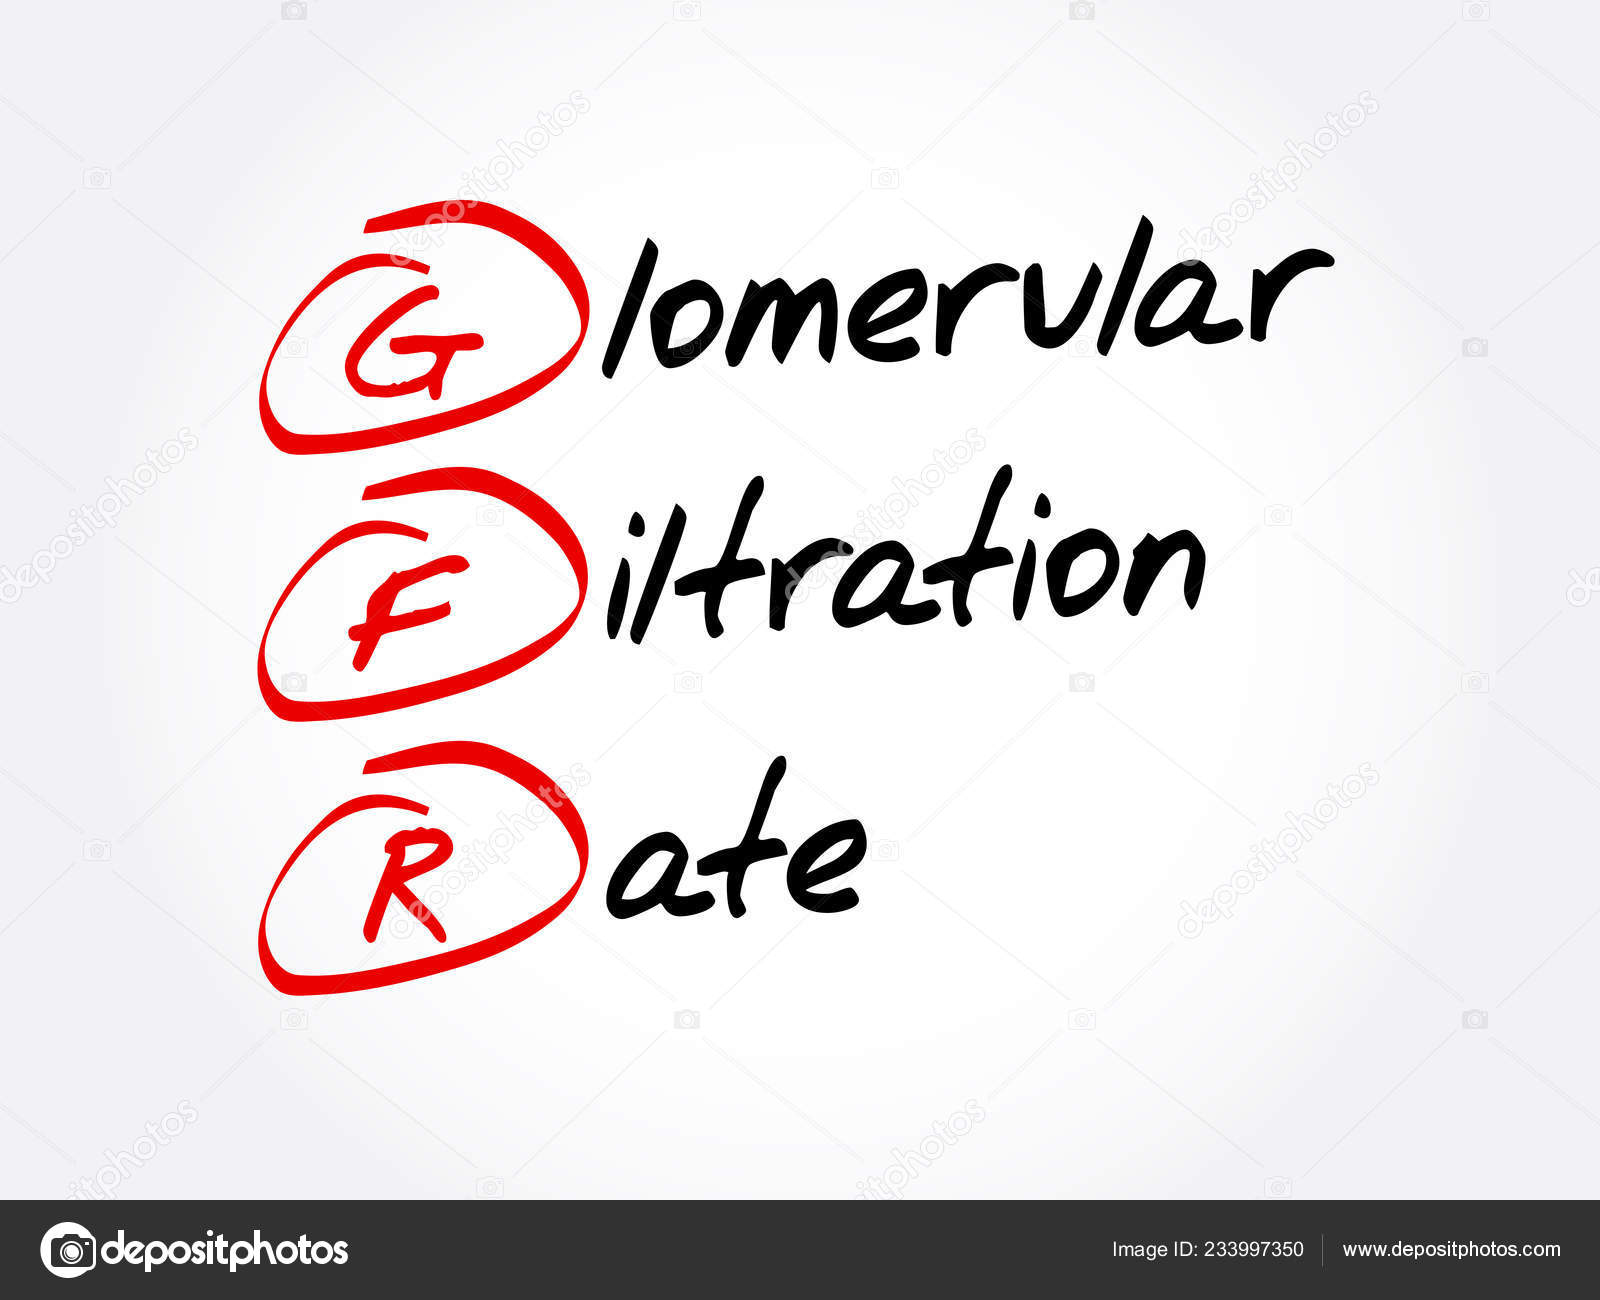 Gfr Glomerular Filtration Rate Acronym Concept Background Stock Vector  Image by ©dizanna #233997350